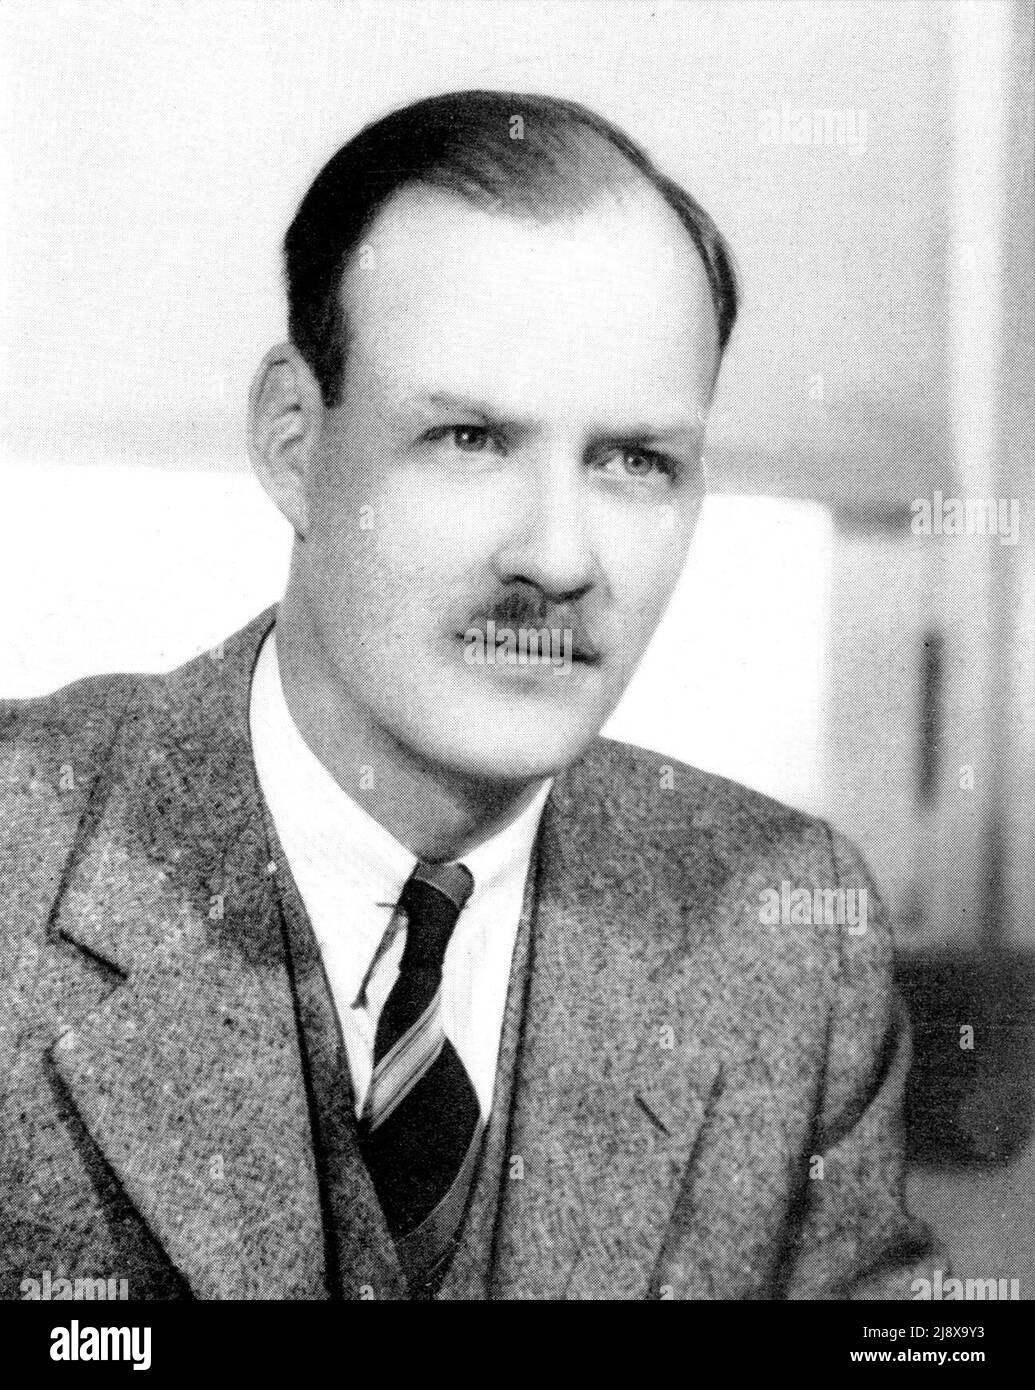 Hugh Hamilton Saunderson, B.A., M. Sc., Ph.D., F.C.I.S.,  (1866-1962). He was Dean of Arts and Science, University of Manitoba, and served as the University President from 1954 - 1970  ca.  1947 Stock Photo